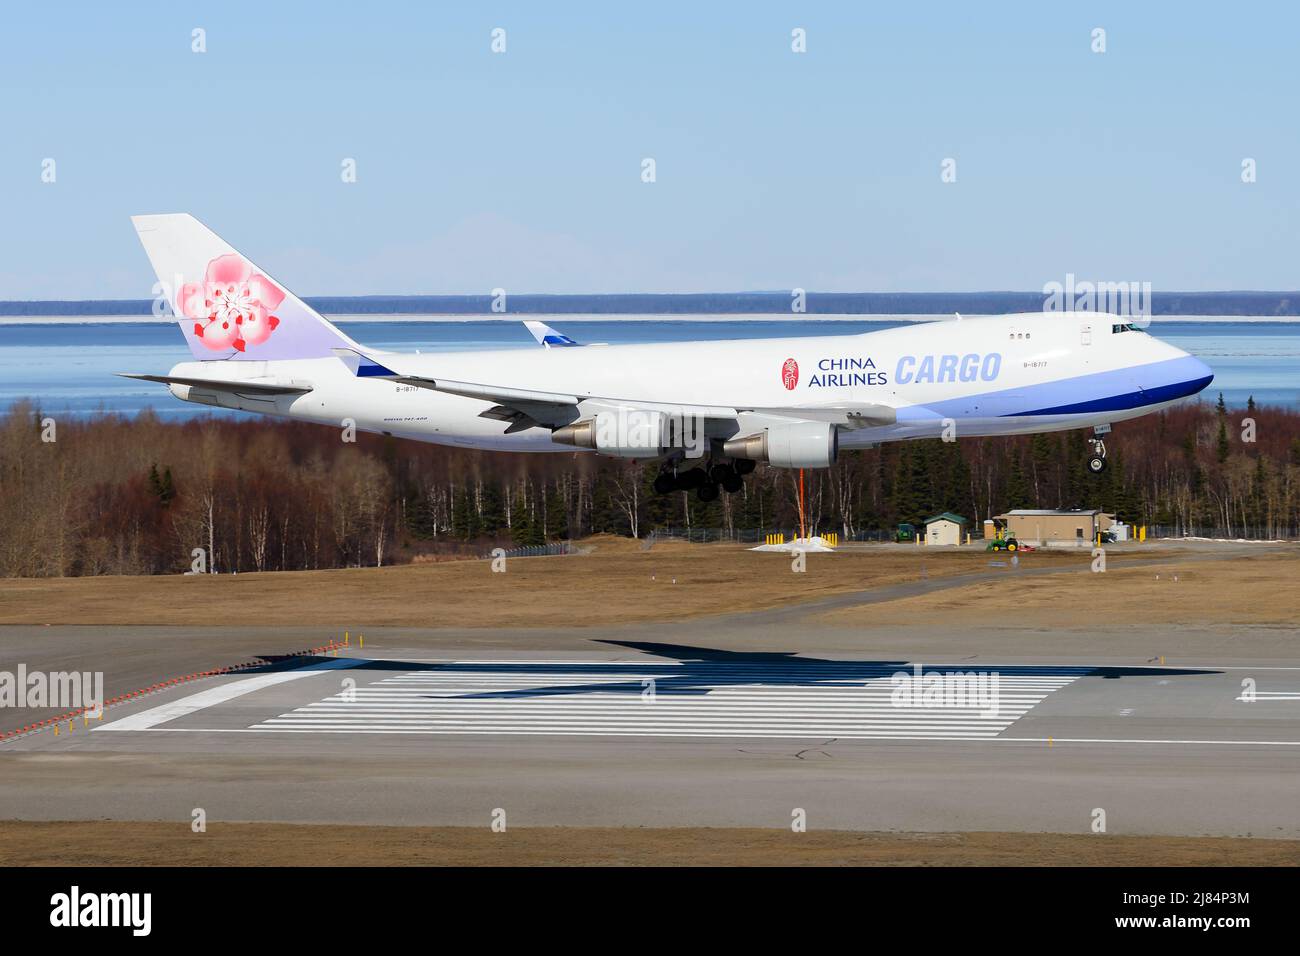 China Airlines Cargo Boeing 747 freighter aircraft landing. Large cargo airplane 747-400F on runway threshold. Plane 747F arrival. Stock Photo